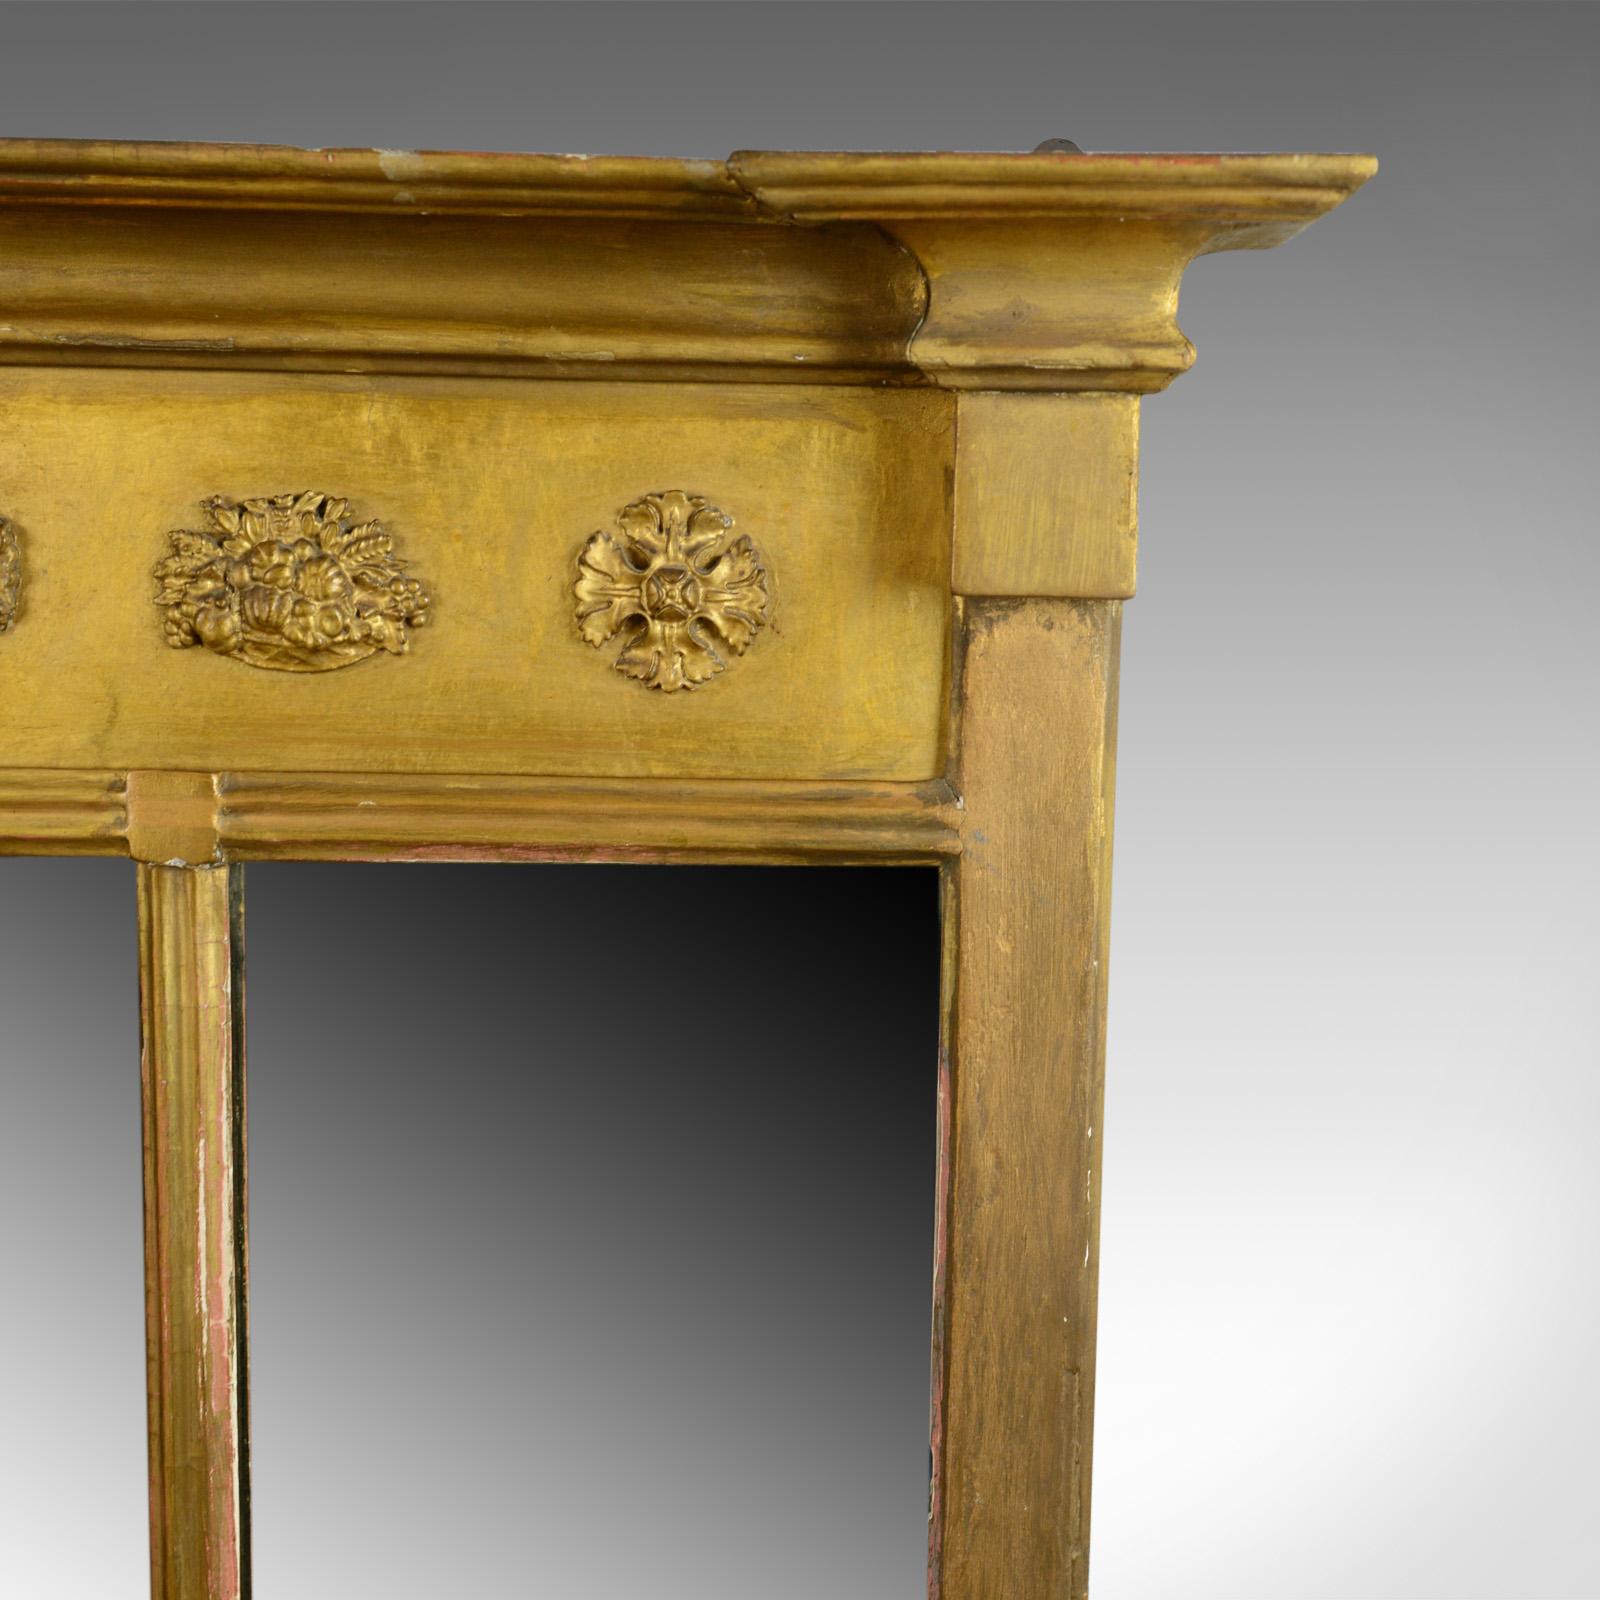 This is an antique overmantel mirror. An English Regency, early 19th century, wall mirror for the hall or drawing room divided as with a triptych, circa 1820.

Attractive, mellow golden tones in the giltwood frame
A quality mirror from the